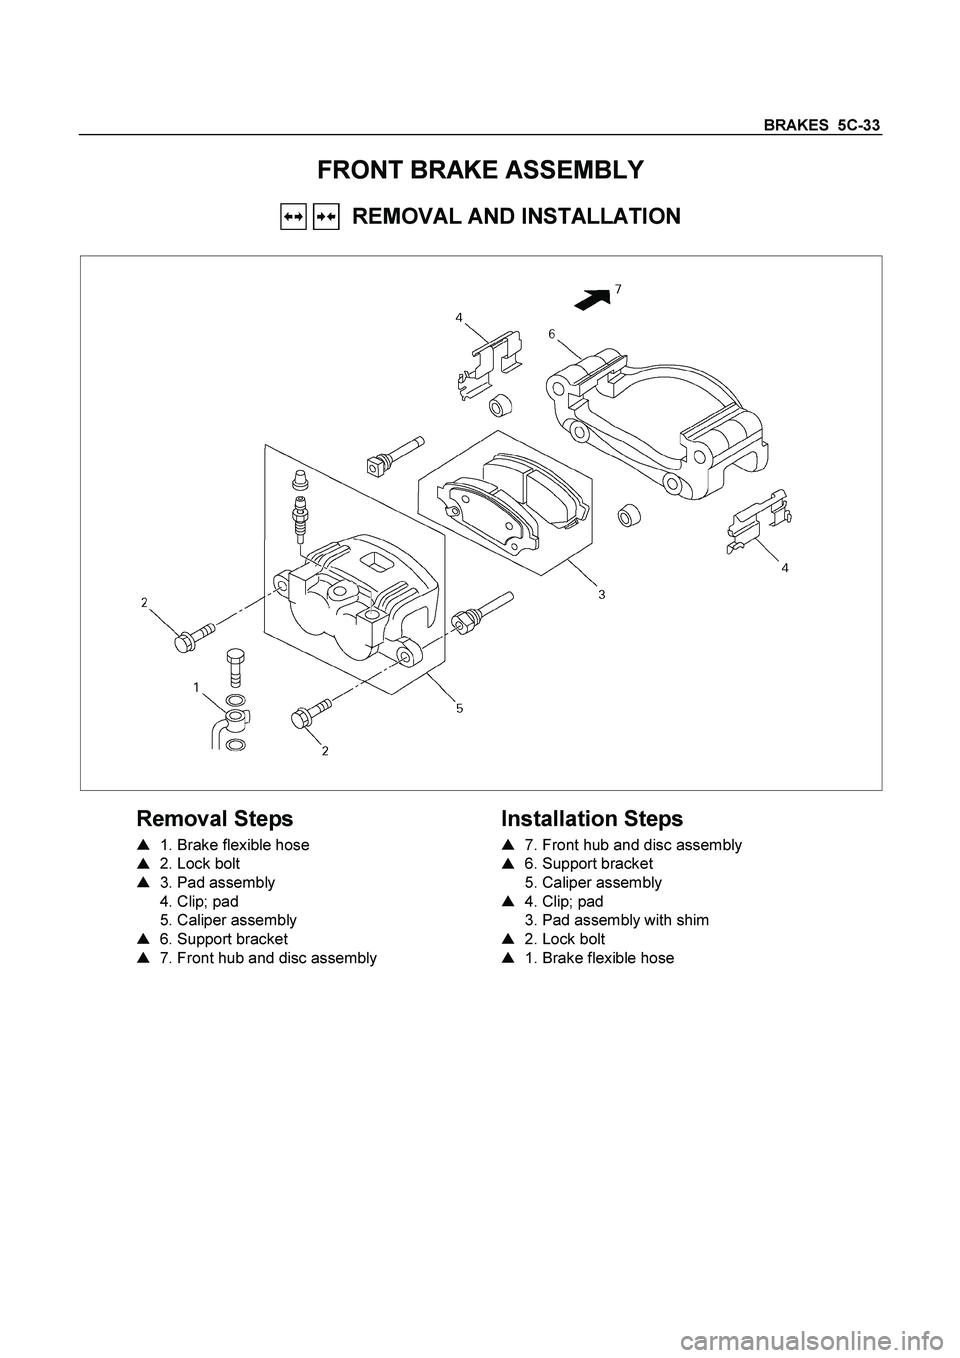 ISUZU TF SERIES 2004  Workshop Manual BRAKES  5C-33  
FRONT BRAKE ASSEMBLY 
   REMOVAL AND INSTALLATION 
 
  
 
Removal Steps 
    
1. Brake flexible hose  
    
2. Lock bolt  
   3. Pad assembly  
   4. Clip; pad  
 5. Caliper assembl